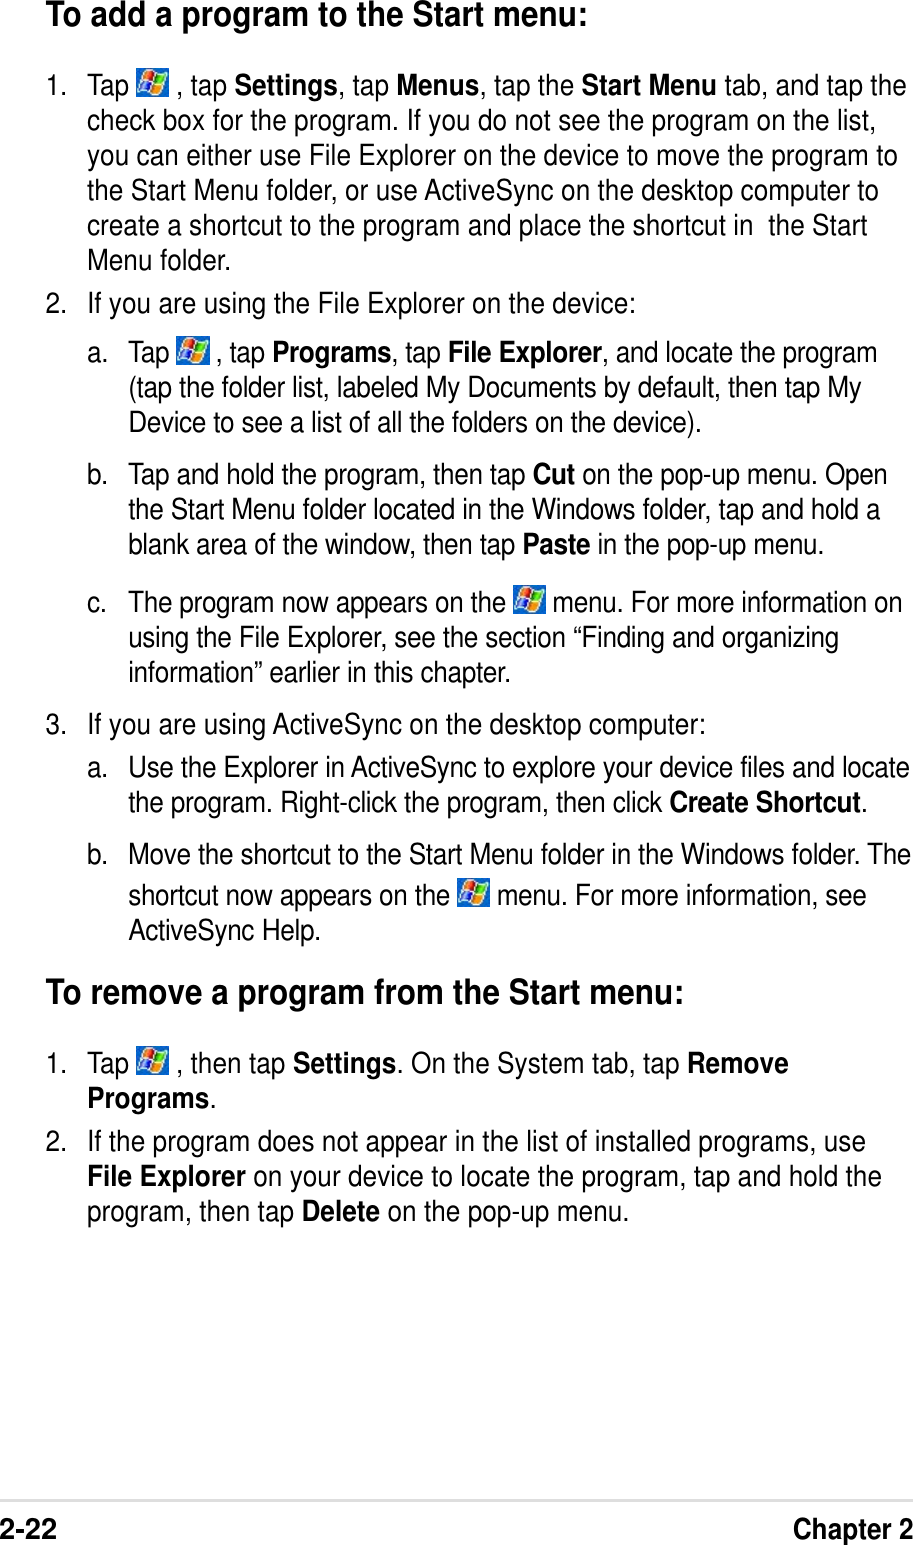 2-22Chapter 2To add a program to the Start menu:1. Tap   , tap Settings, tap Menus, tap the Start Menu tab, and tap thecheck box for the program. If you do not see the program on the list,you can either use File Explorer on the device to move the program tothe Start Menu folder, or use ActiveSync on the desktop computer tocreate a shortcut to the program and place the shortcut in  the StartMenu folder.2. If you are using the File Explorer on the device:a. Tap   , tap Programs, tap File Explorer, and locate the program(tap the folder list, labeled My Documents by default, then tap MyDevice to see a list of all the folders on the device).b. Tap and hold the program, then tap Cut on the pop-up menu. Openthe Start Menu folder located in the Windows folder, tap and hold ablank area of the window, then tap Paste in the pop-up menu.c. The program now appears on the   menu. For more information onusing the File Explorer, see the section “Finding and organizinginformation” earlier in this chapter.3. If you are using ActiveSync on the desktop computer:a. Use the Explorer in ActiveSync to explore your device files and locatethe program. Right-click the program, then click Create Shortcut.b. Move the shortcut to the Start Menu folder in the Windows folder. Theshortcut now appears on the   menu. For more information, seeActiveSync Help.To remove a program from the Start menu:1. Tap   , then tap Settings. On the System tab, tap RemovePrograms.2. If the program does not appear in the list of installed programs, useFile Explorer on your device to locate the program, tap and hold theprogram, then tap Delete on the pop-up menu.